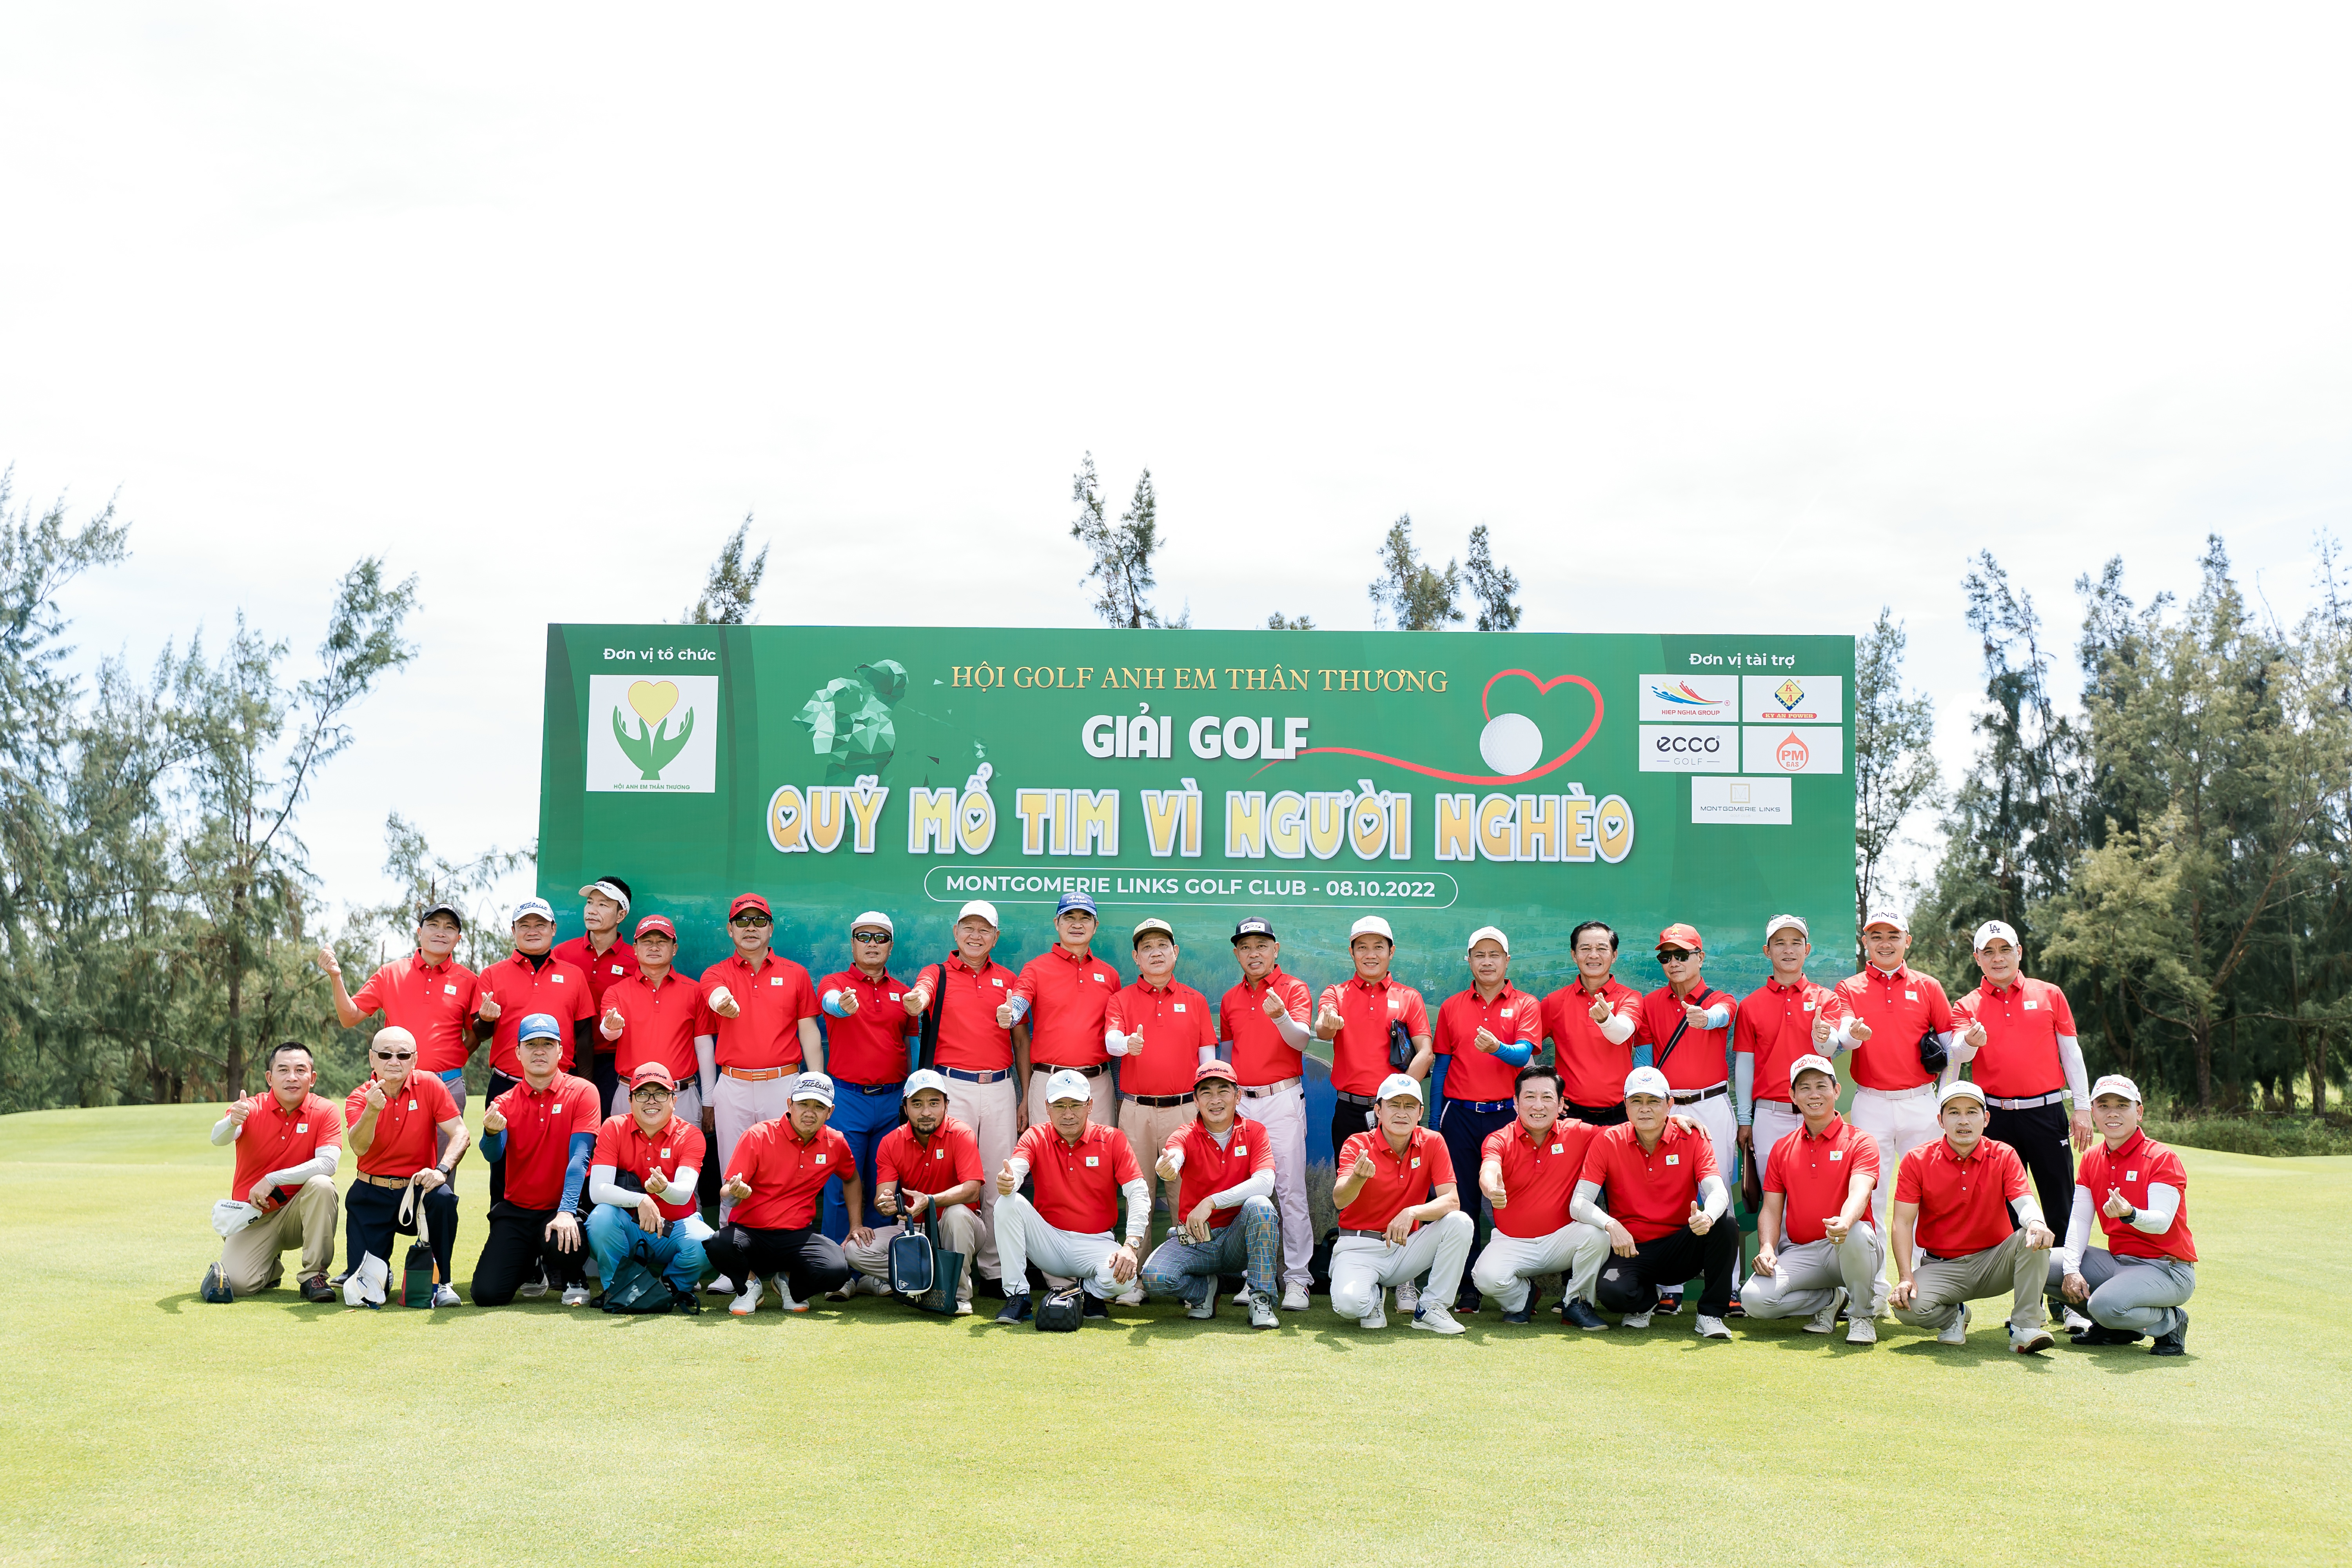 GOLF TOURNAMENT "HEART SURGERY FUND FOR THE POOR" RELAUNCHED FOR THE 2ND TIME